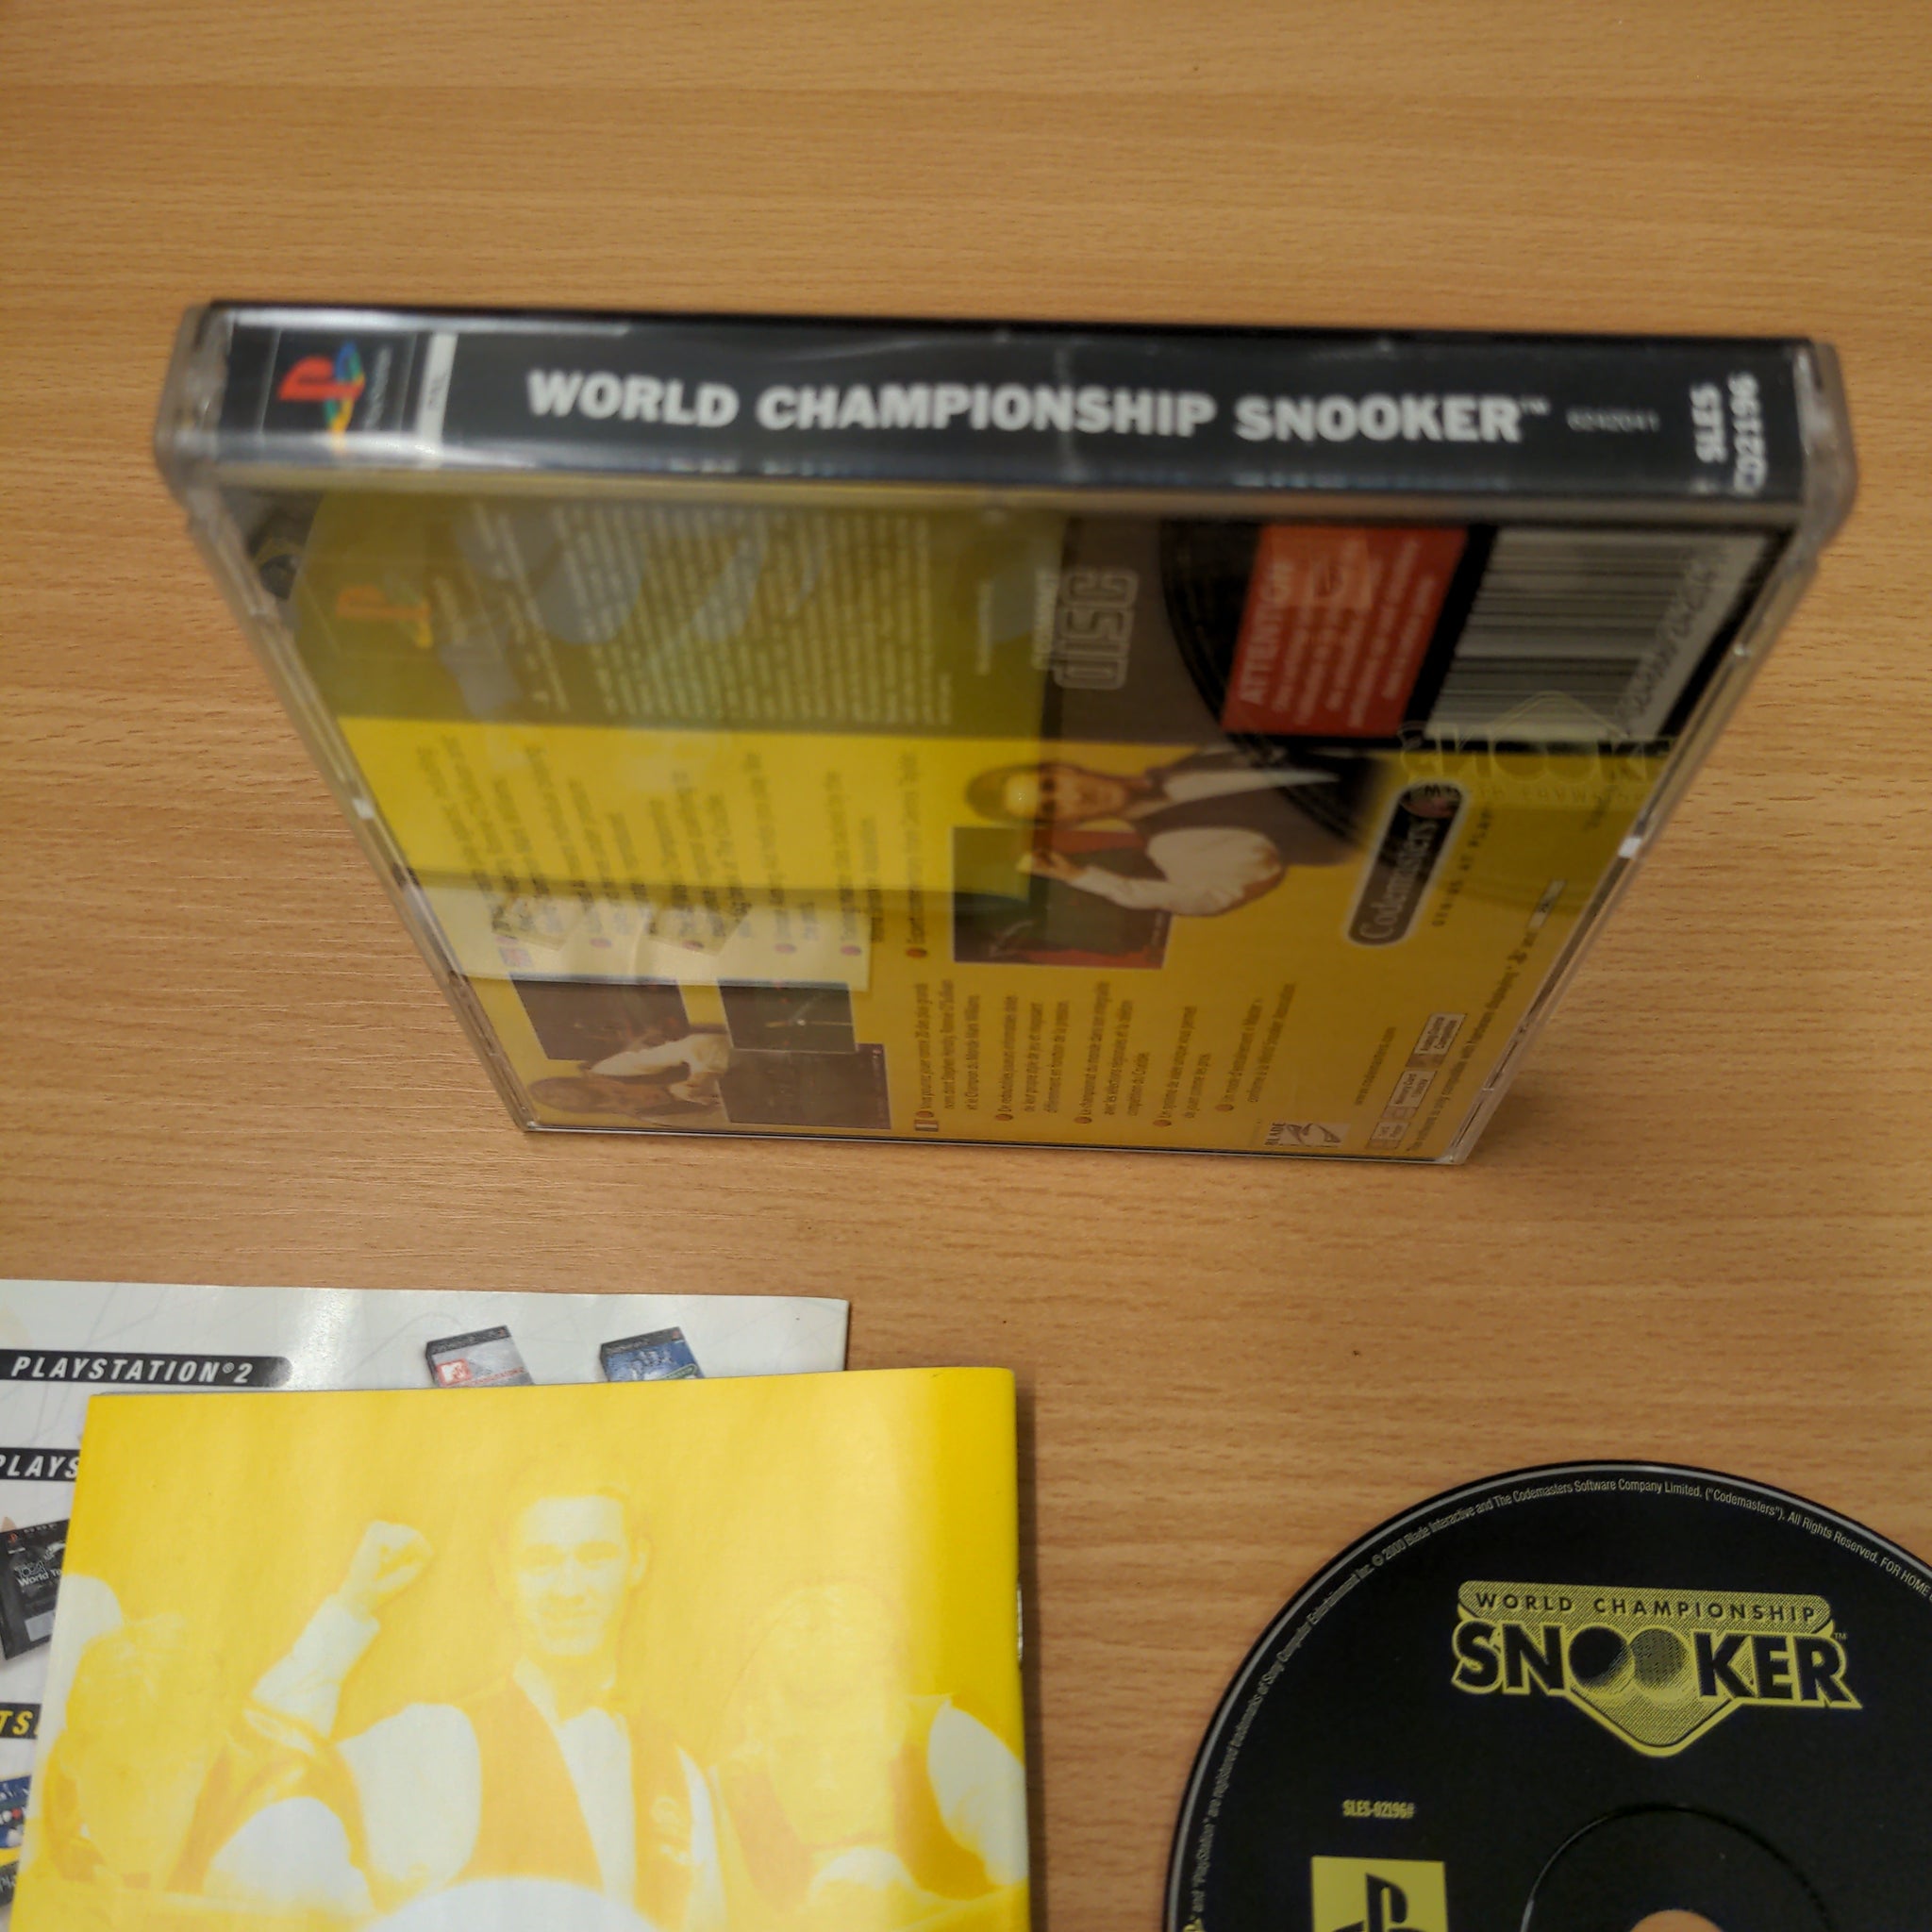 World Championship Snooker (Bestsellers) Sony PS1 game